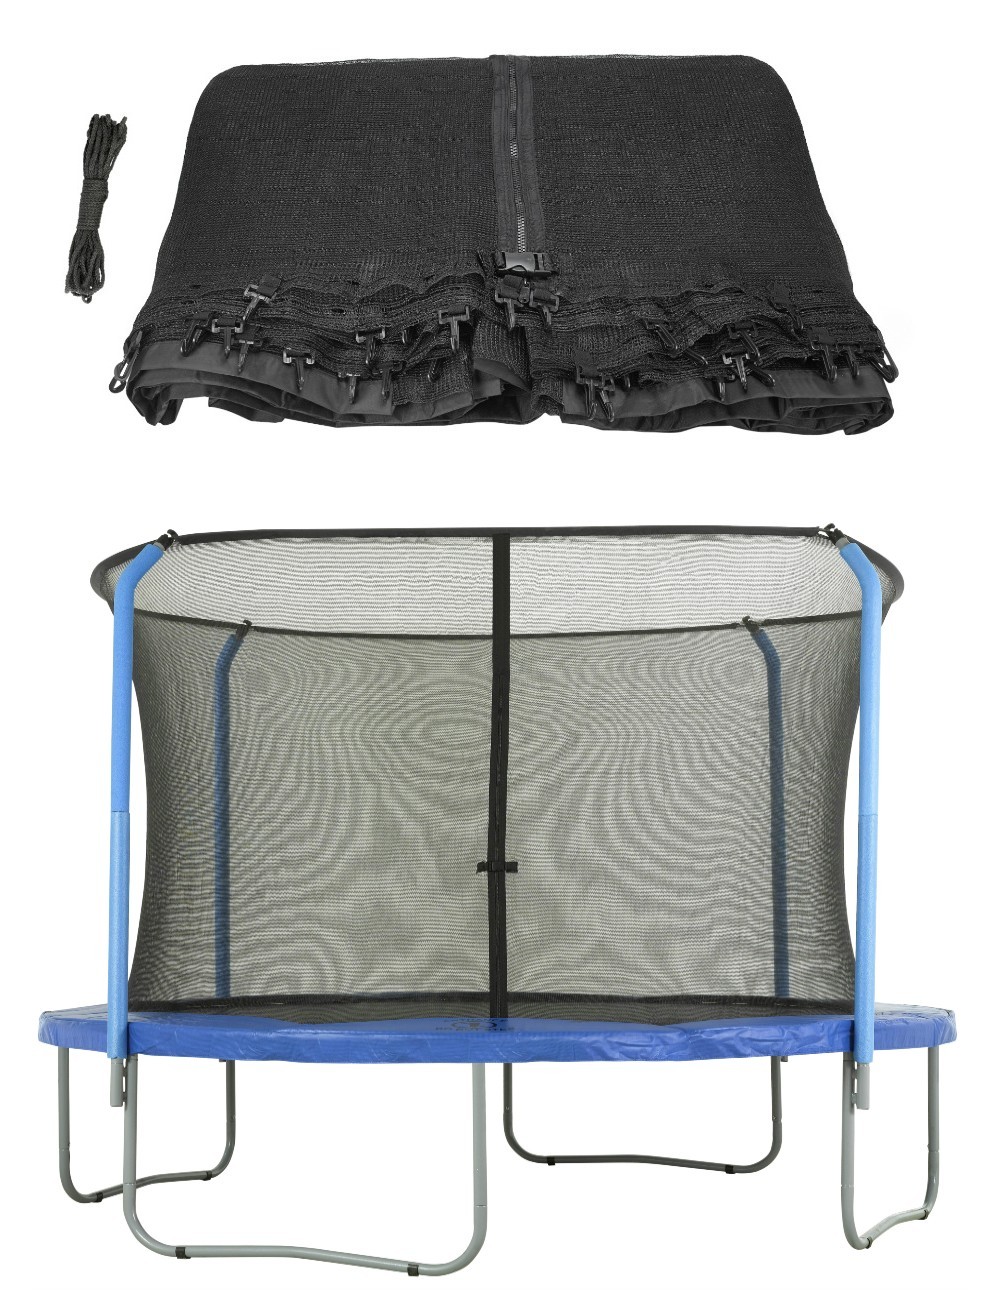 Trampoline Replacement Enclosure Safety Net for 10 ft. Round Frames using 4 Bent Poles and Top Ring - Net Only